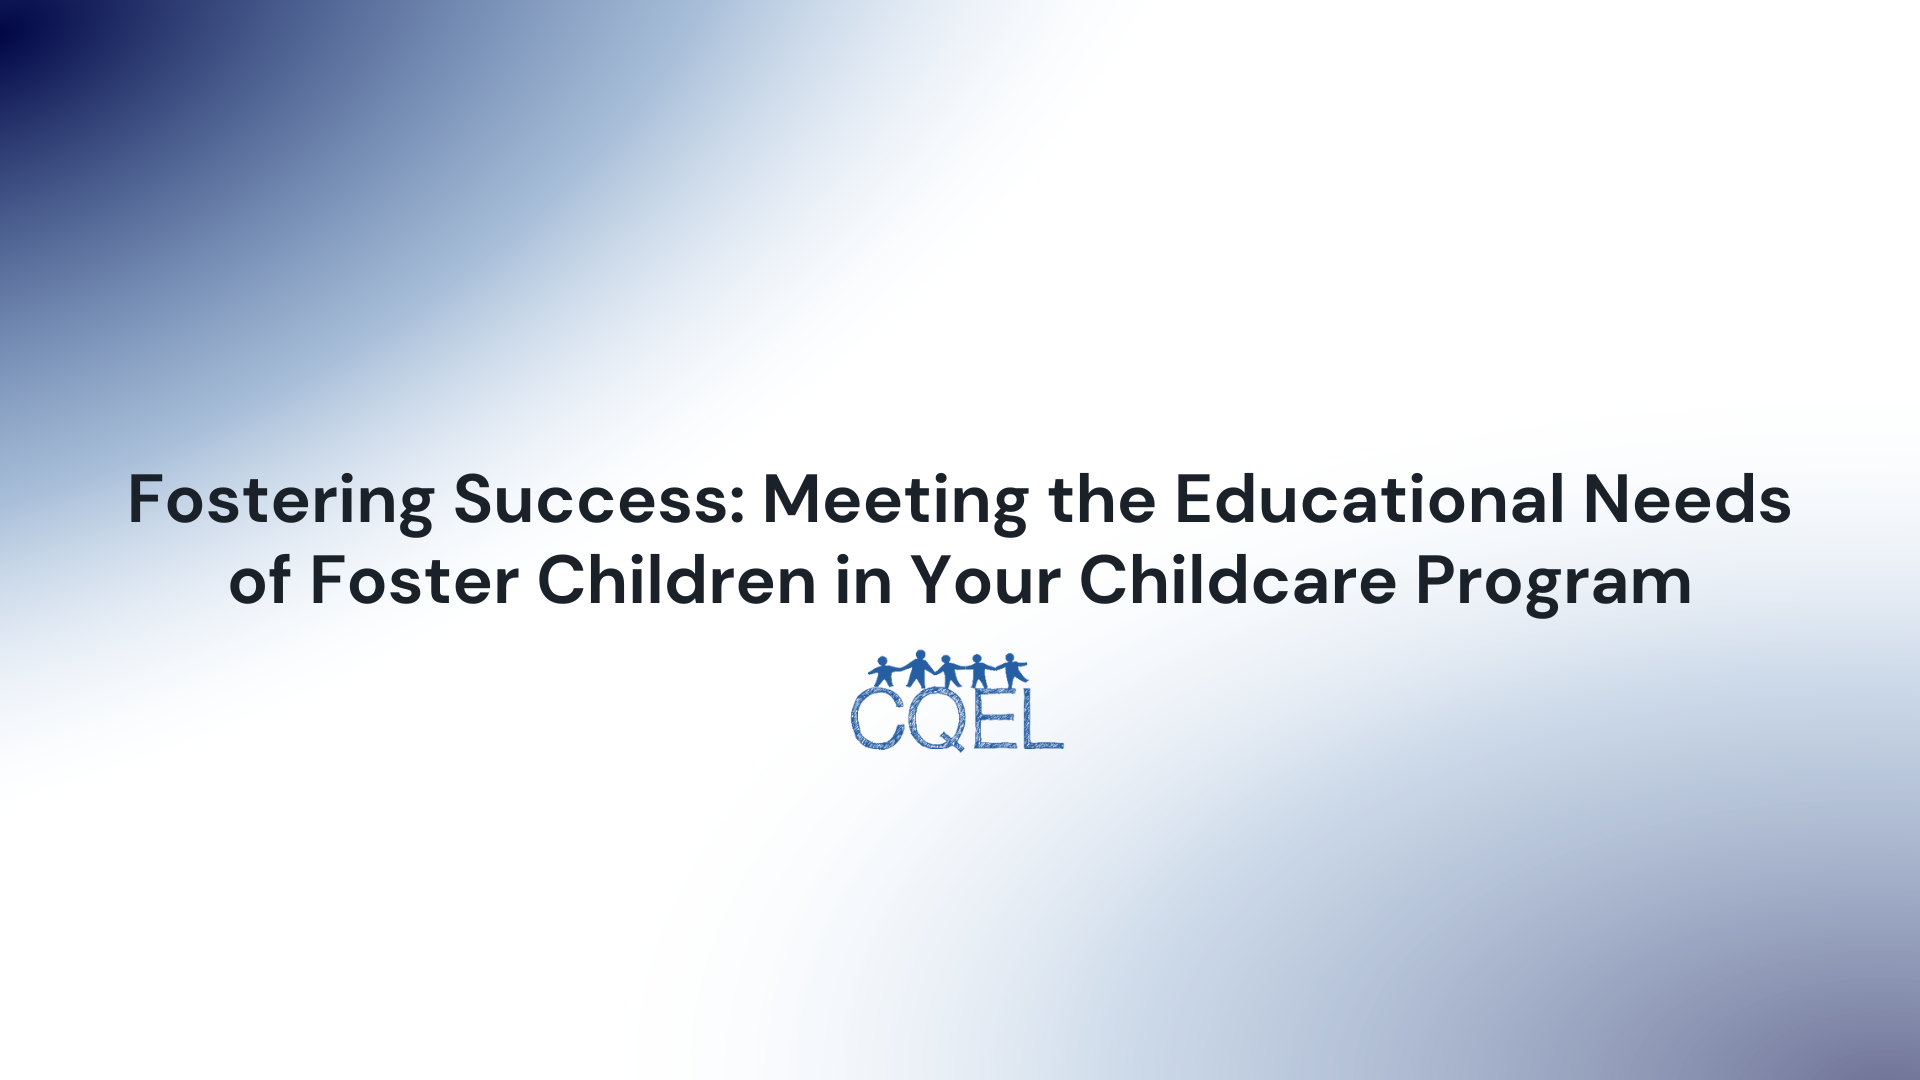 Fostering Success: Meeting the Educational Needs of Foster Children in Your Childcare Program